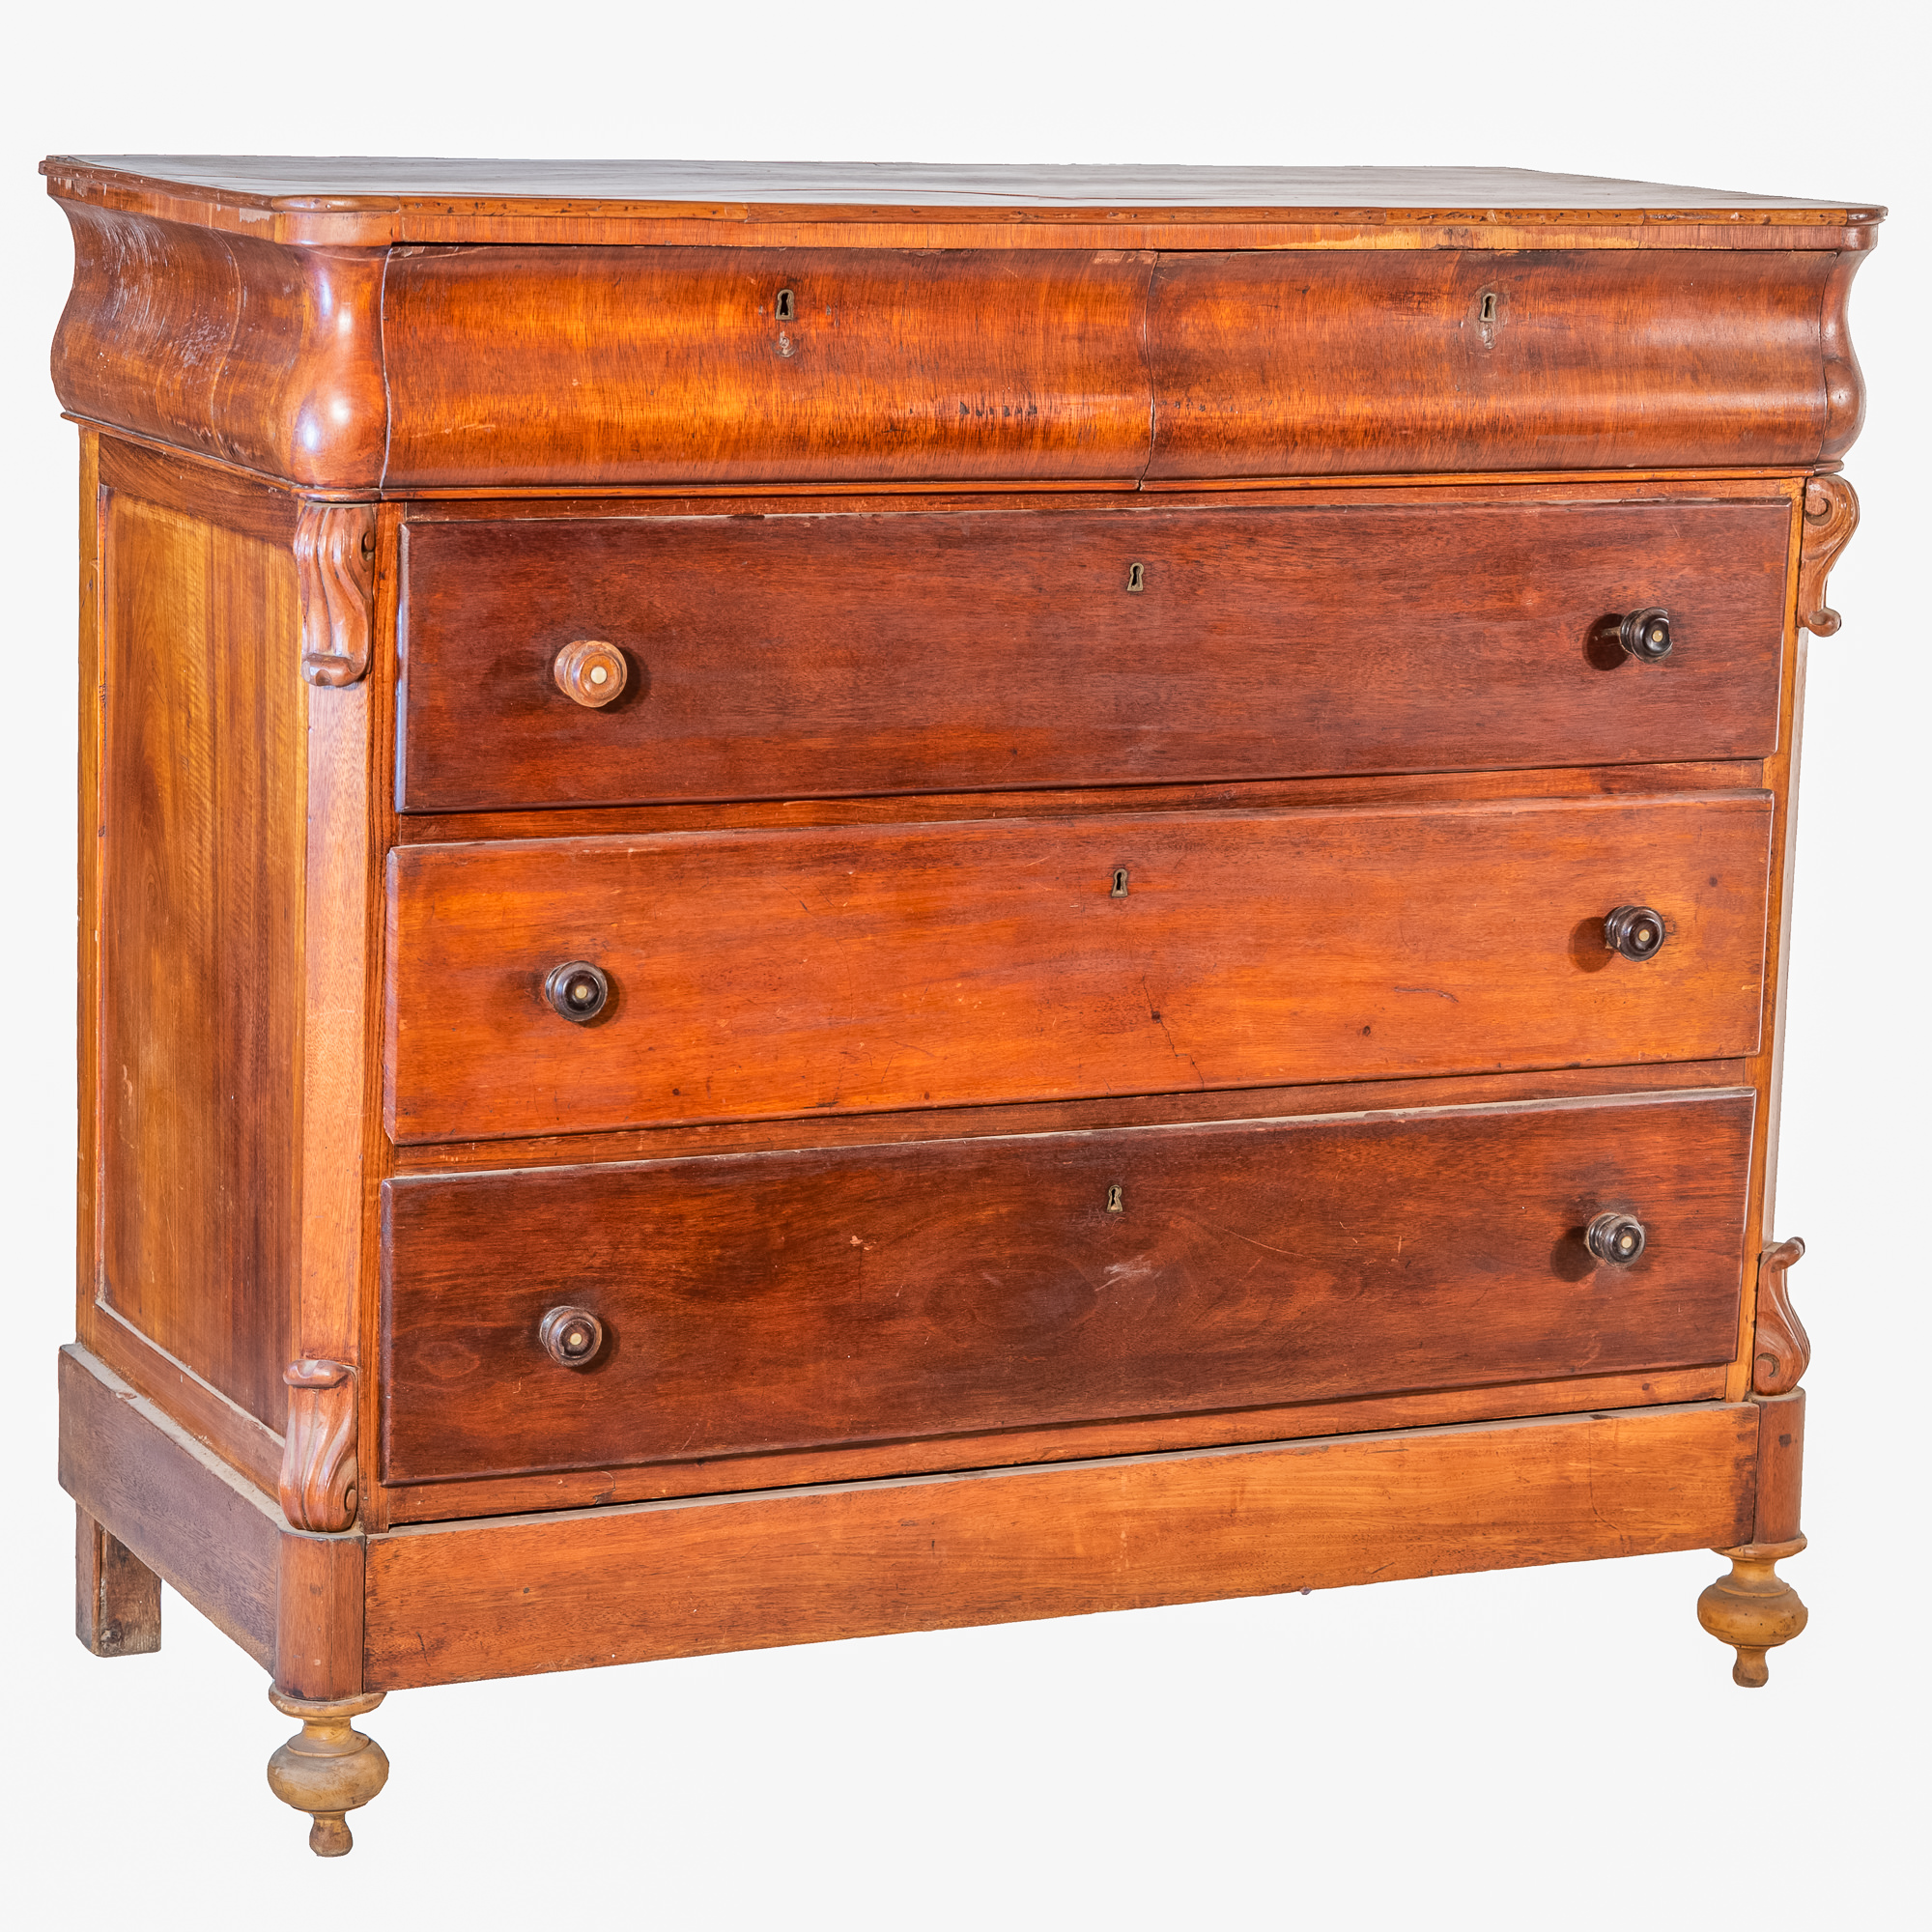 'Continental Walnut Chest of Drawers Late 19th Century'